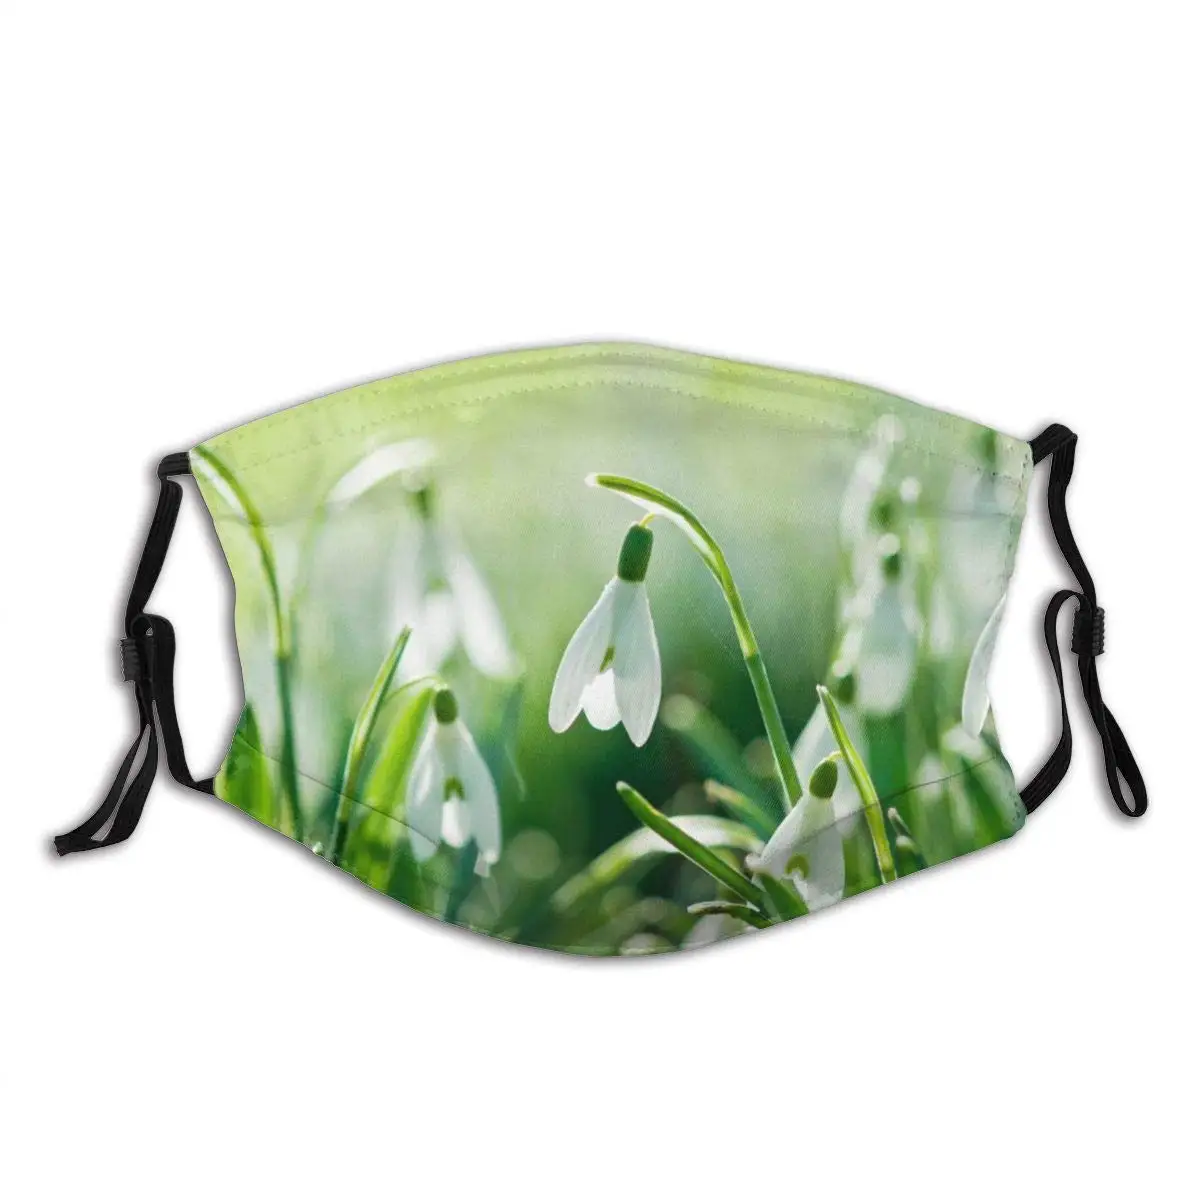 

Face Mask Adjustable Earloops Breathable Reusable Outdoor Mouth Cover Dust Mask for Adults Kids - Snowdrops Nature Flowers